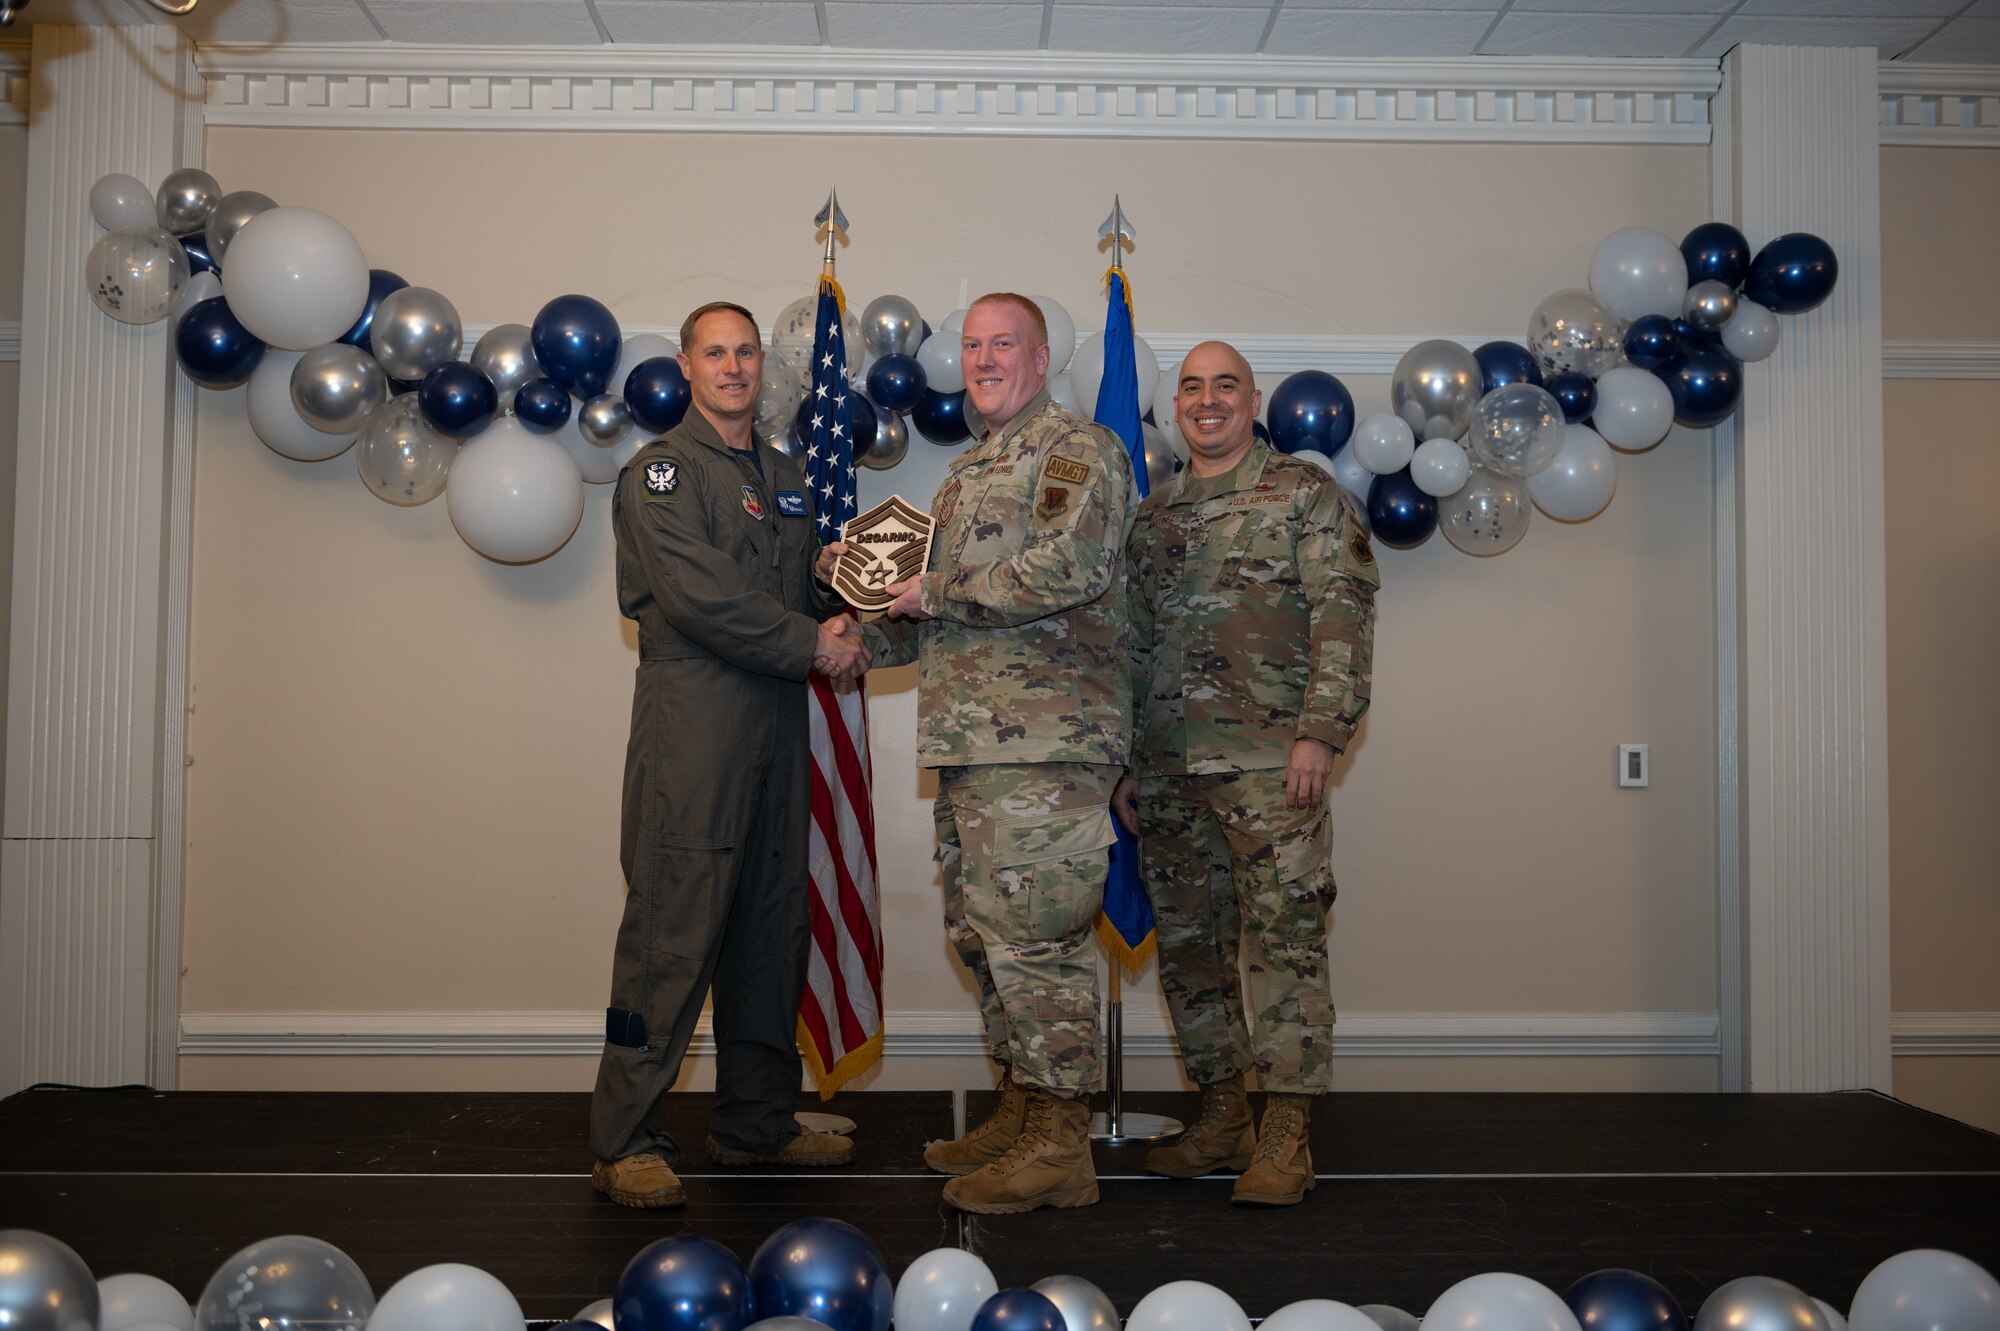 Col. Lucas Teel, 4th Fighter Wing commander, and Chief Master Sgt. Peter Martinez, 4th FW command chief, present a plaque to Senior Master Sgt. select Donald Degarmo, 4th Operations Support Squadron superintendent host aviation resource management, during the senior master sergeant release ceremony at Seymour Johnson Air Force Base, North Carolina, March 17, 2023. Air Force officials selected 1,629 master sergeants for promotion to senior master sergeant, out of 16,031 eligible, for a selection rate of 10 percent this promotion cycle. (U.S. Air Force photo by Airman 1st Class Rebecca Sirimarco-Lang)